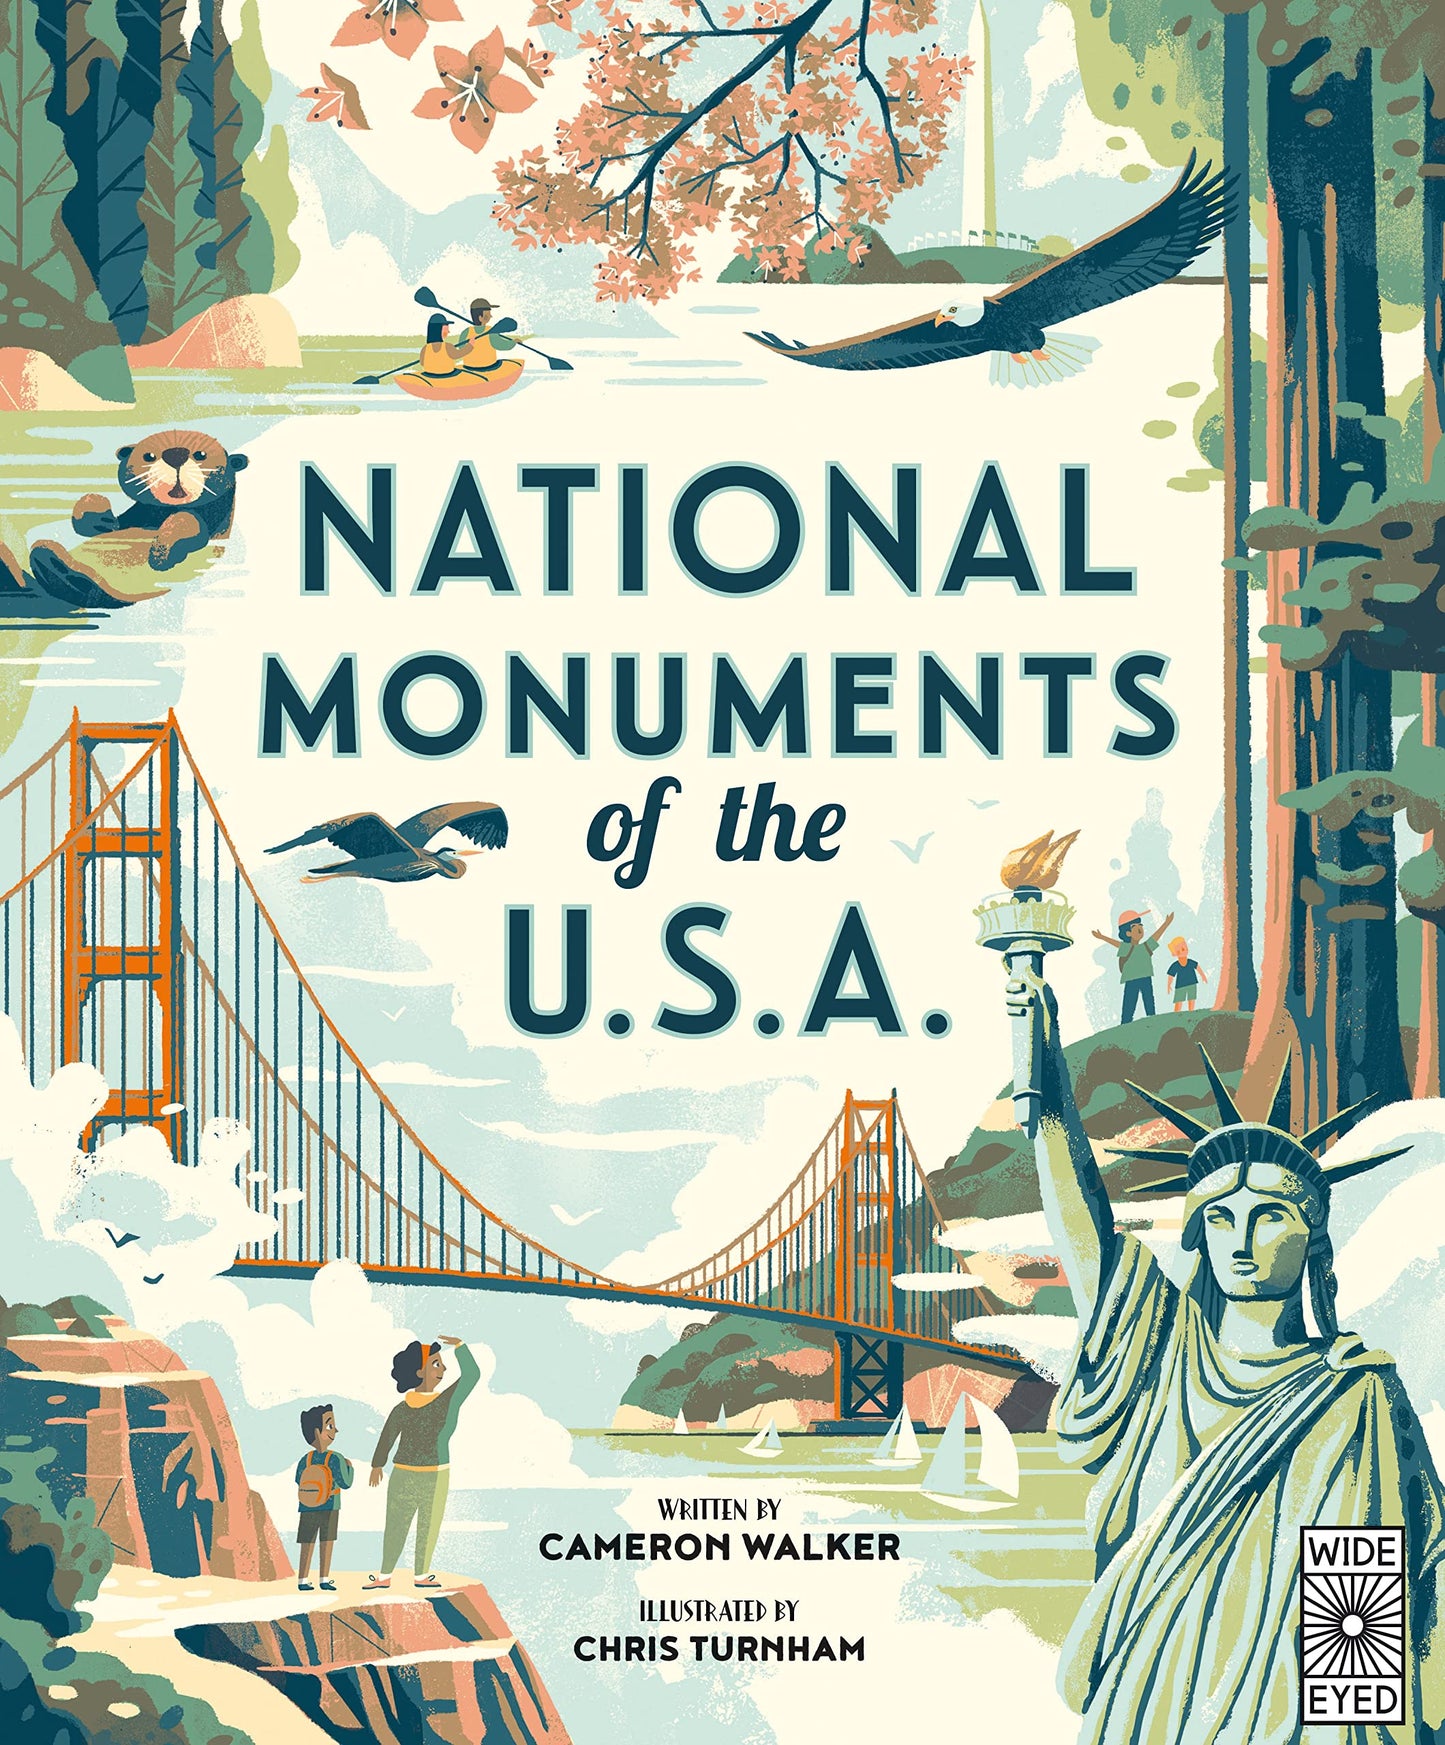 National Monuments of the U.S.A